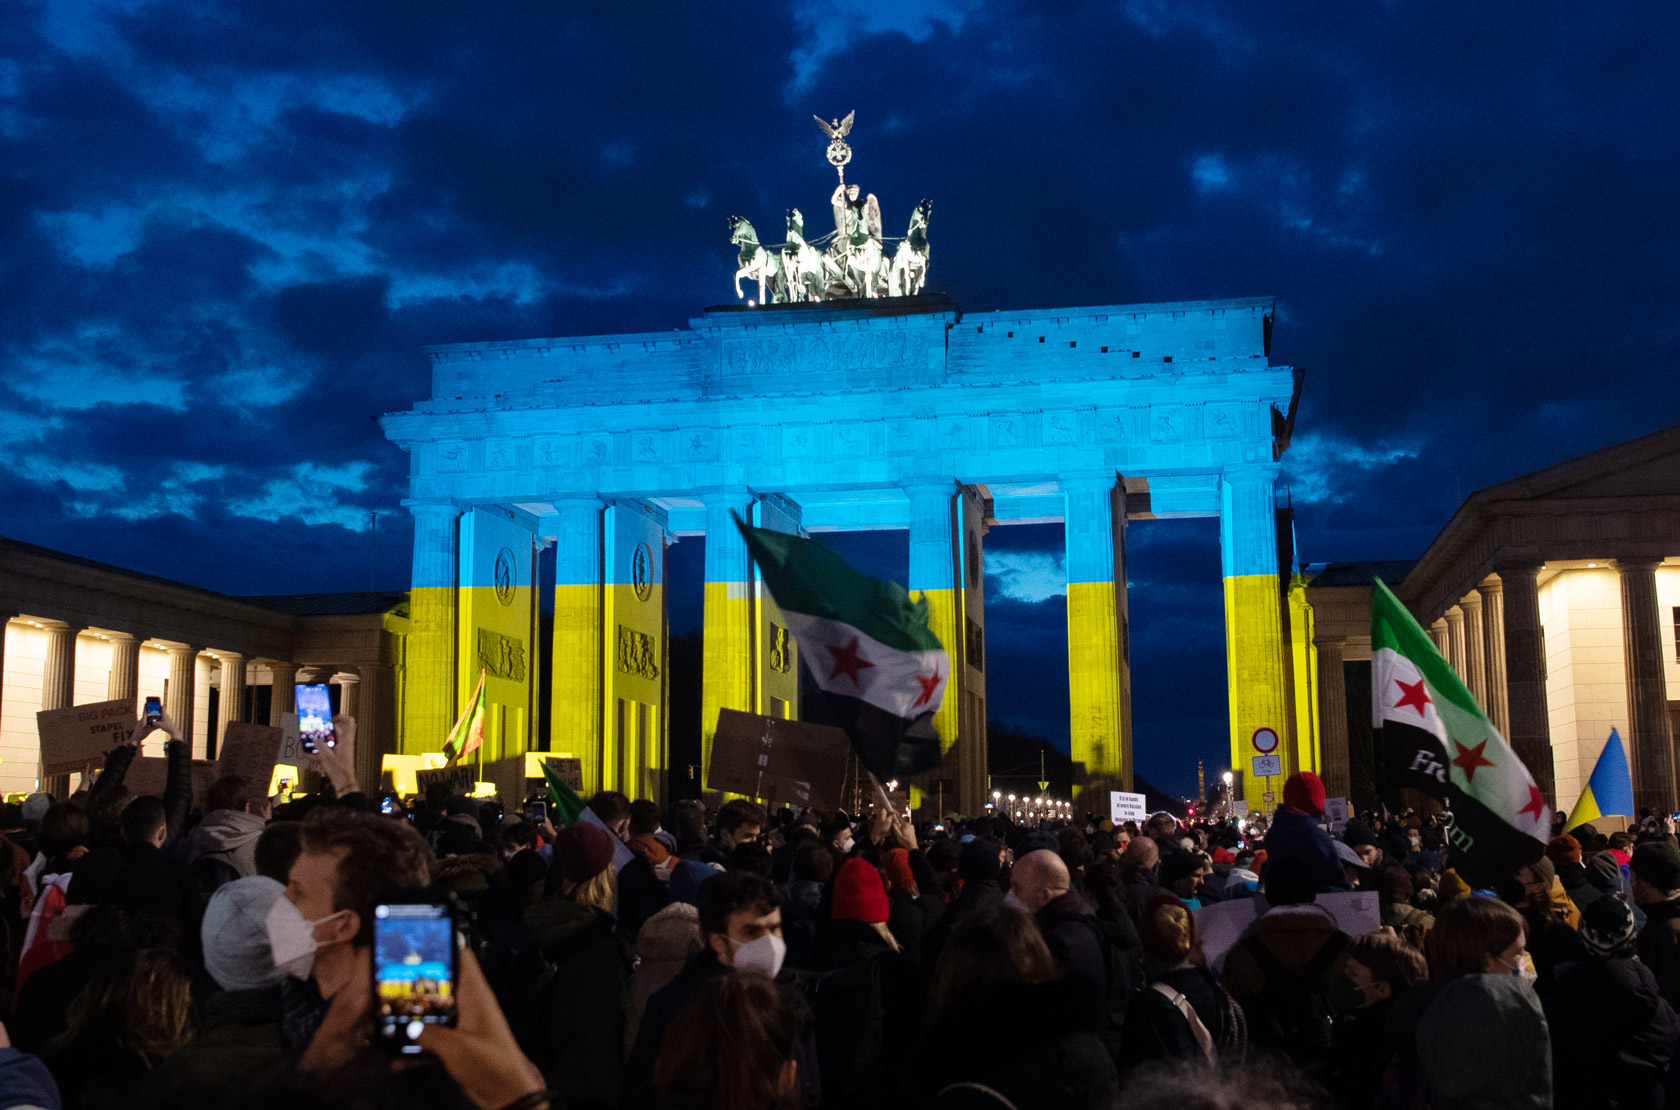 The Brandenburg Gate in Berlin is lit up in the colors of the Ukrainian flag on Feb. 24.